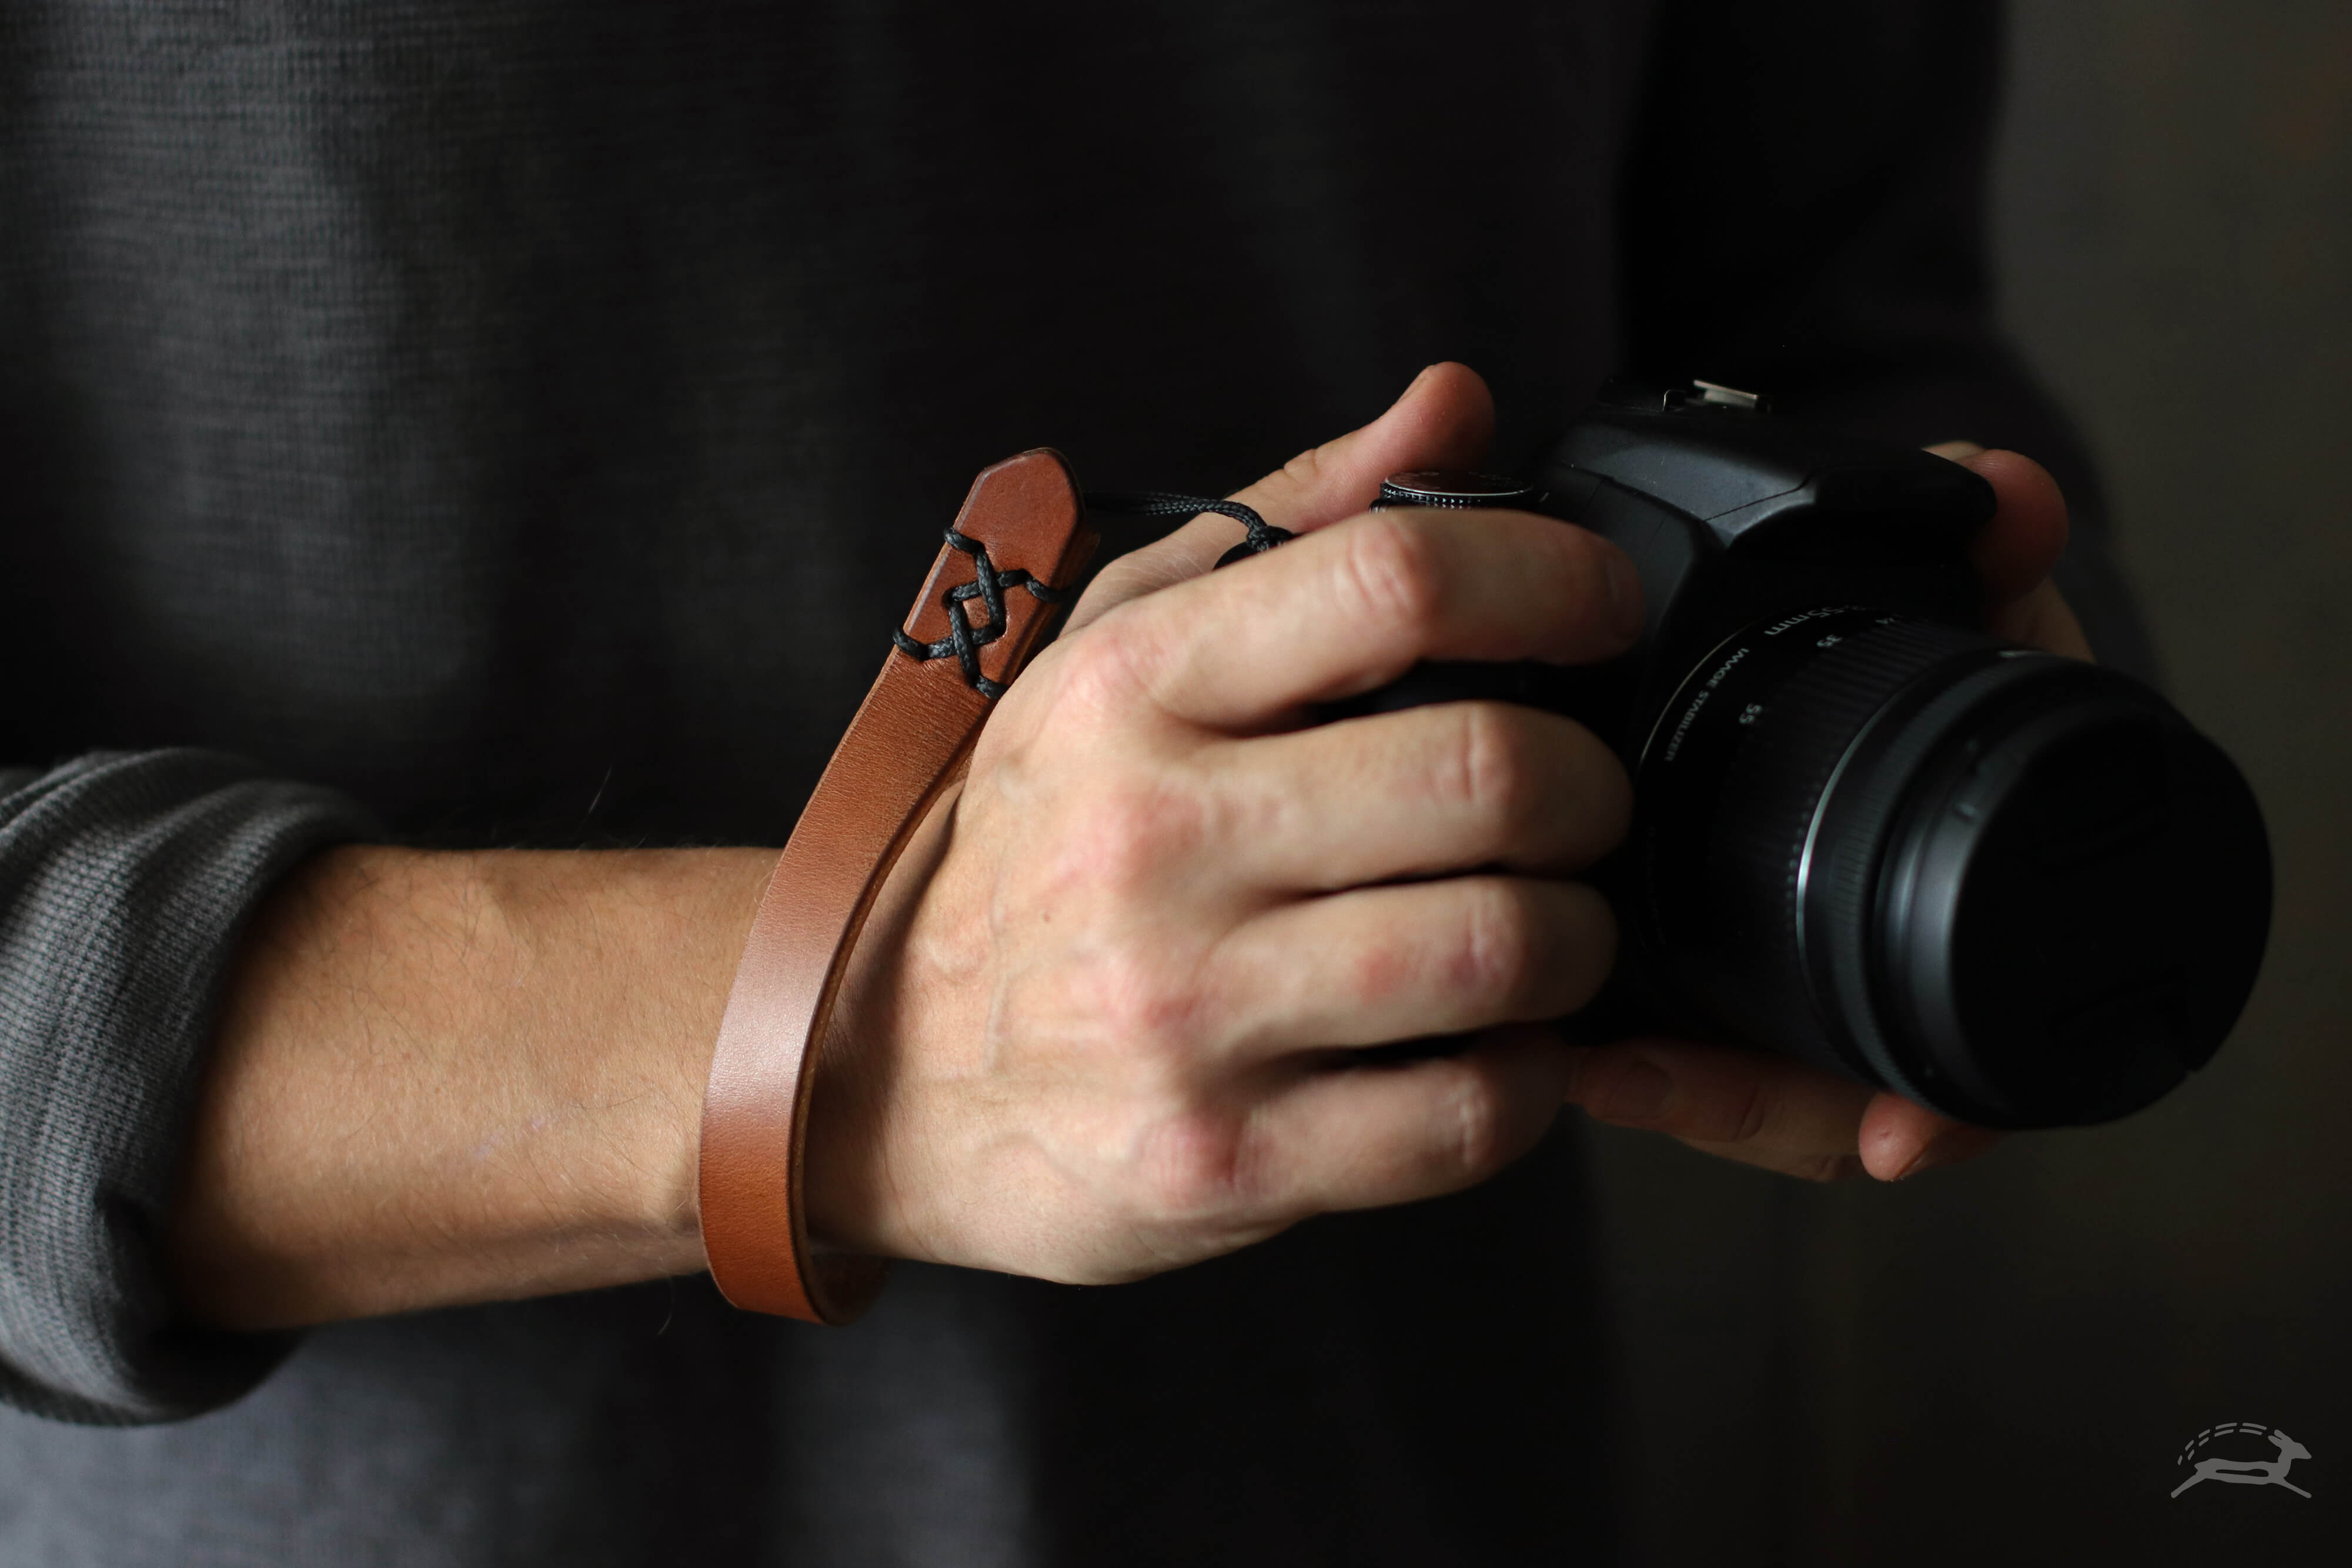 Custom Leather Strap for Photographers - OCHRE handcrafted